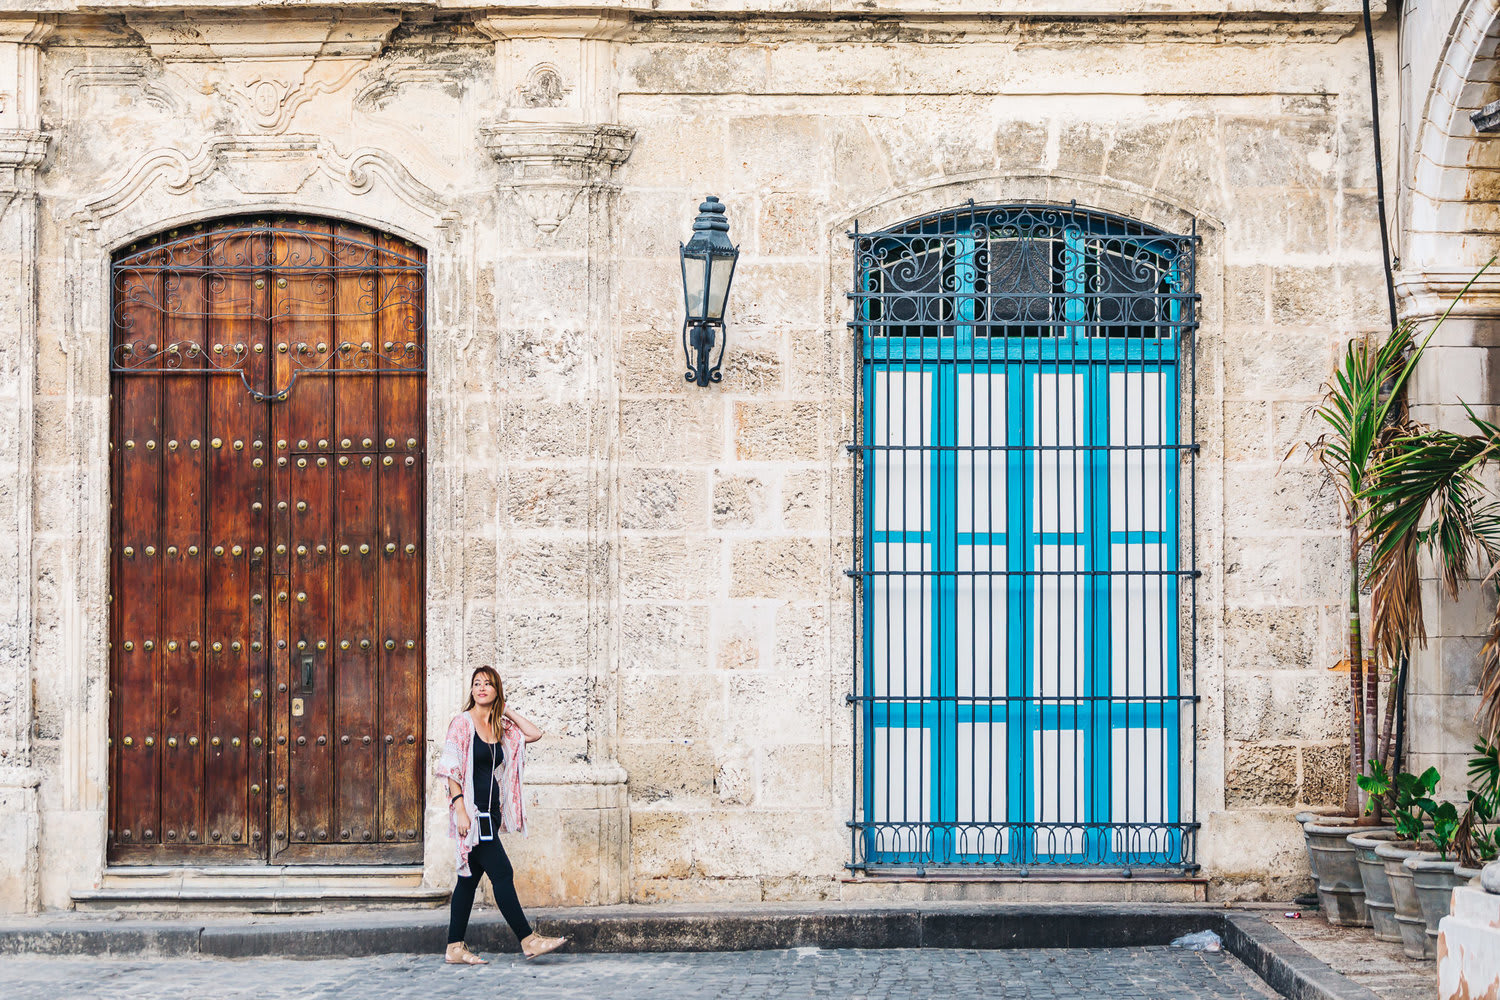 15 Things We Learned From Our First Trip to Cuba - Travel Pockets